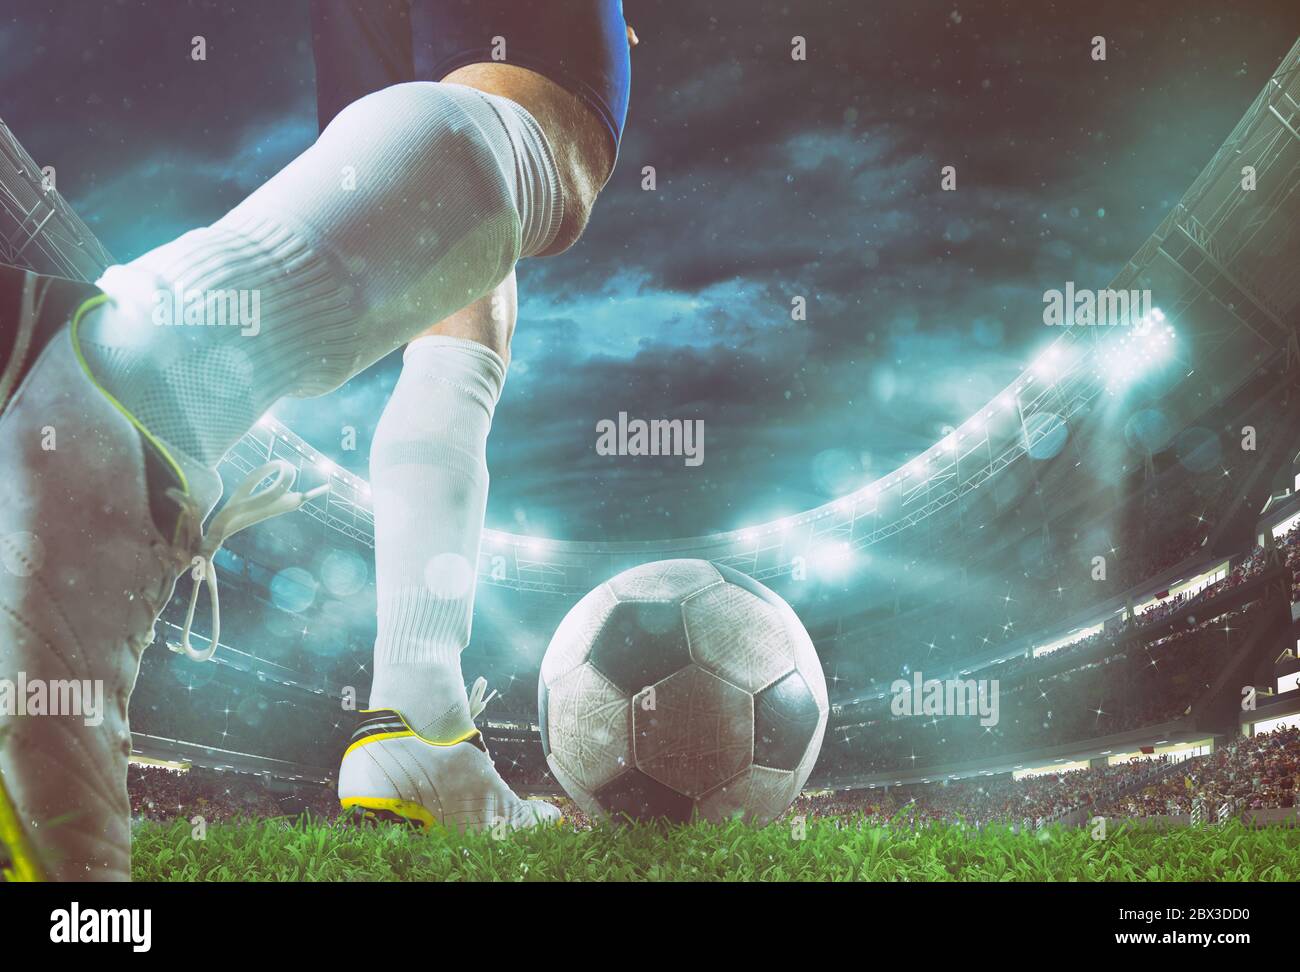 Close up perspective of a soccer scene at night match with player kicking the ball Stock Photo